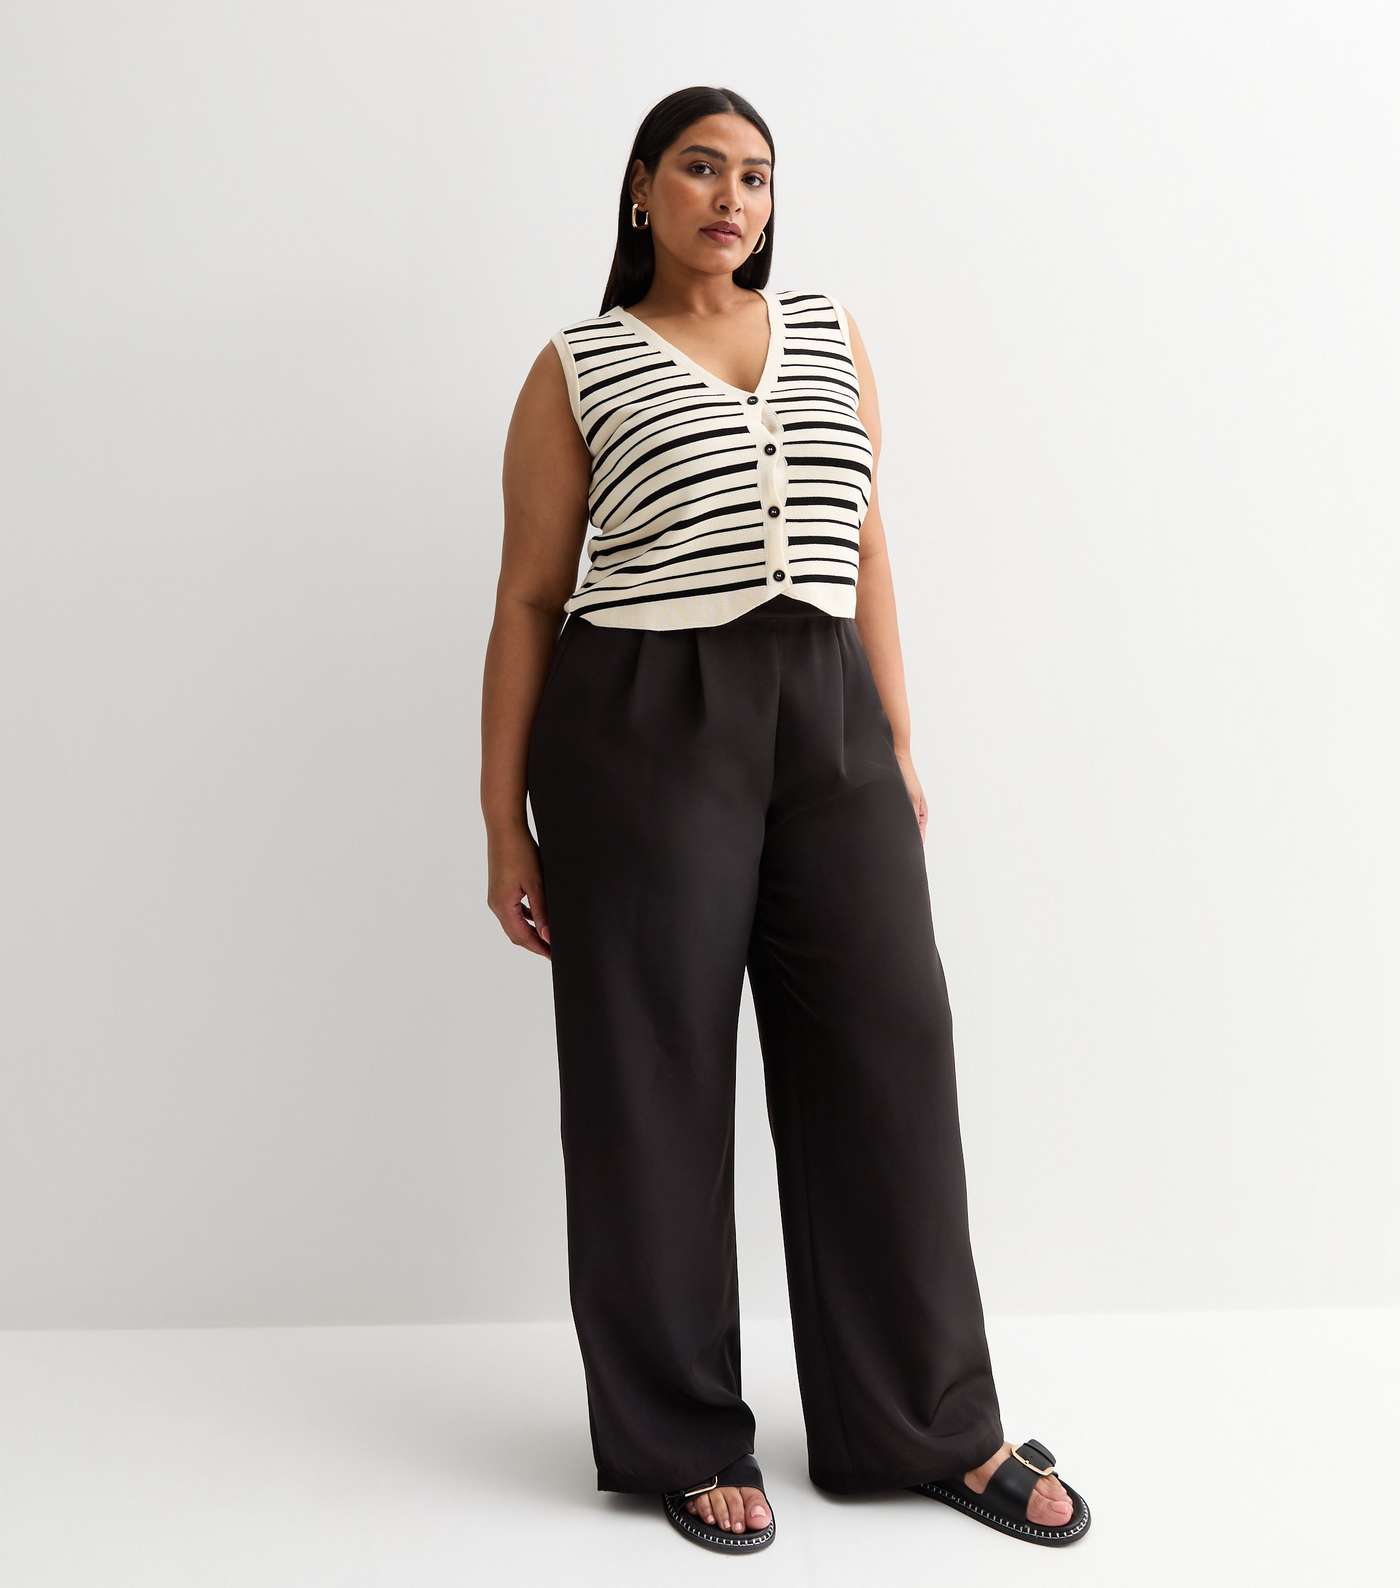 Black Elasticated Tailored Wide Leg Trousers Image 3